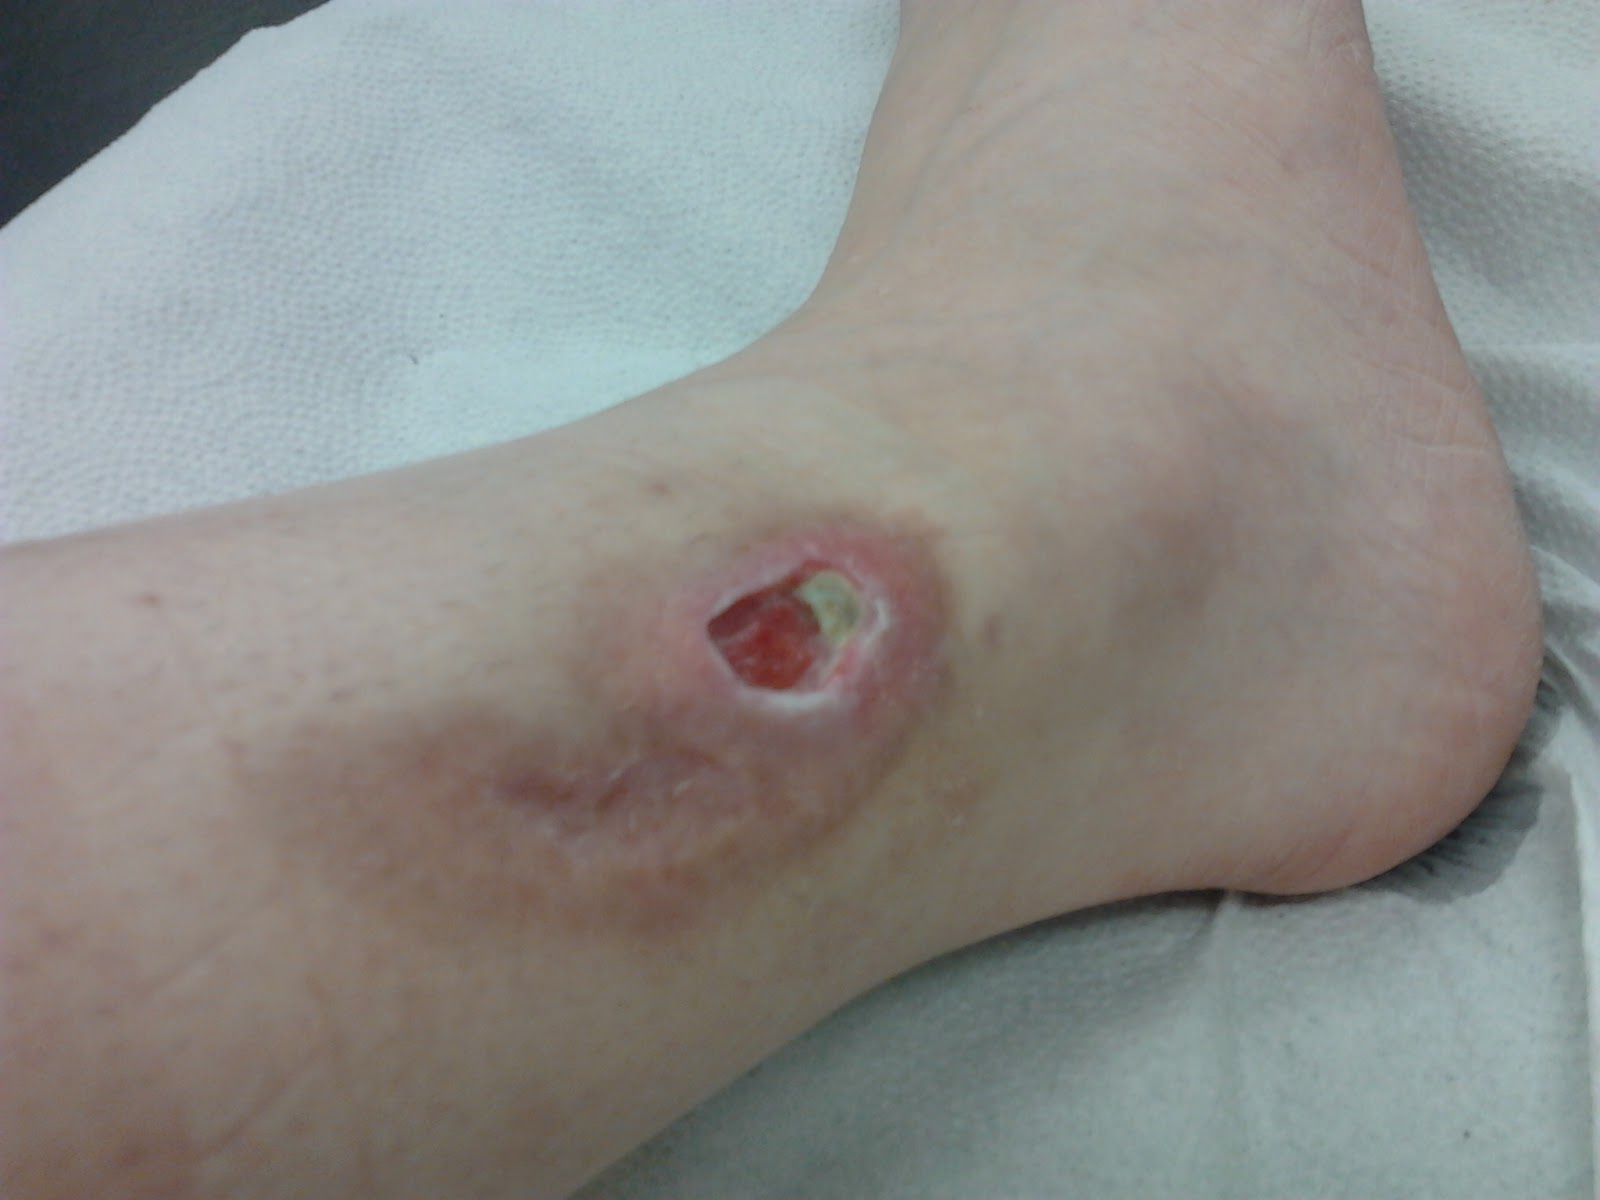 Leg ulcer images, picture of venous and arterial leg ulcers